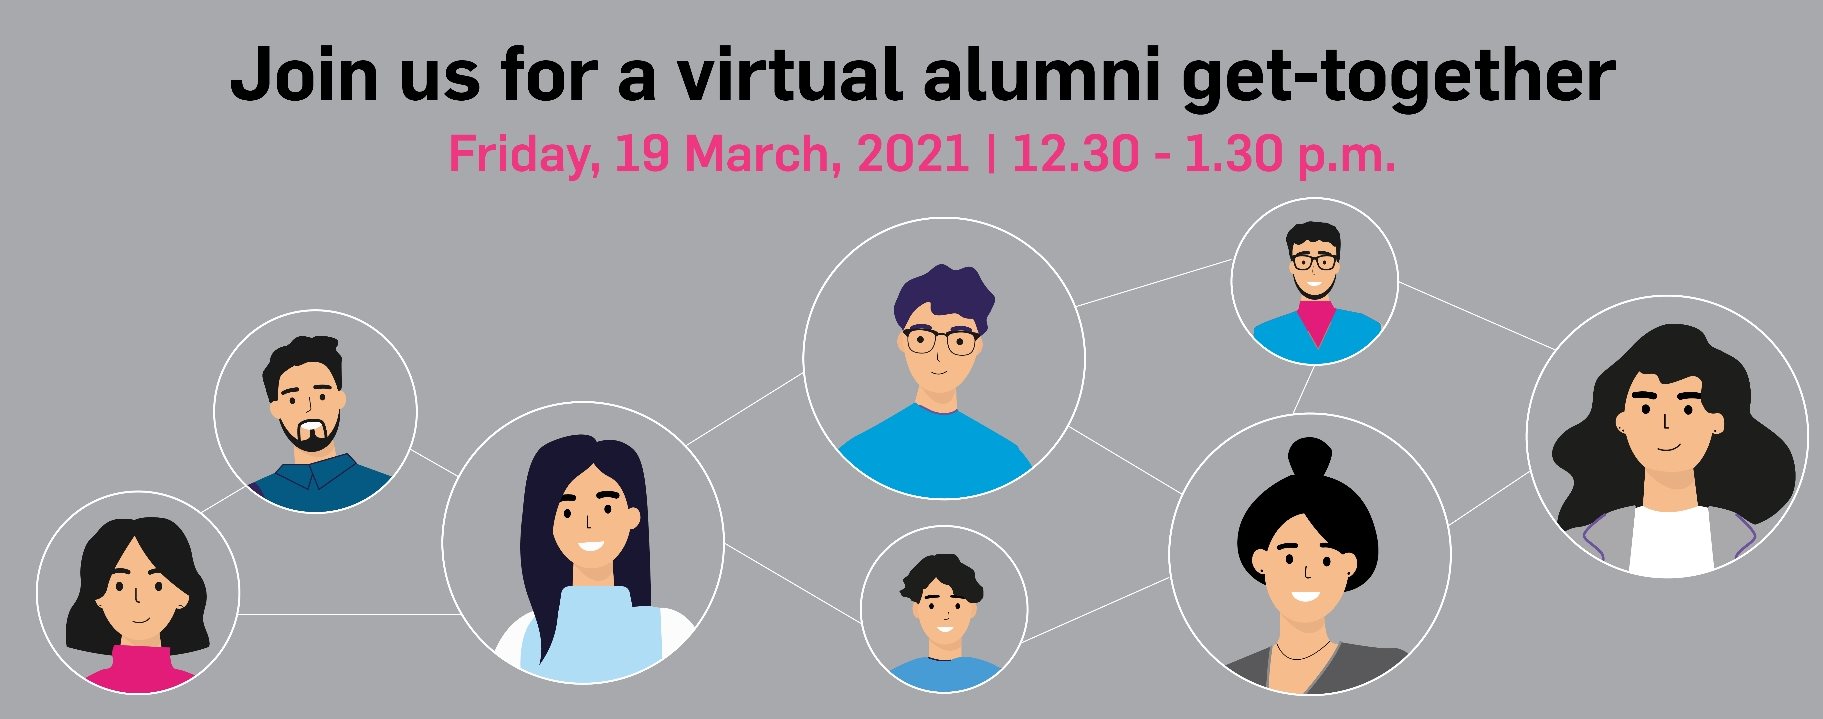 this is a poster for the virtual alumni event on Friday 19 March